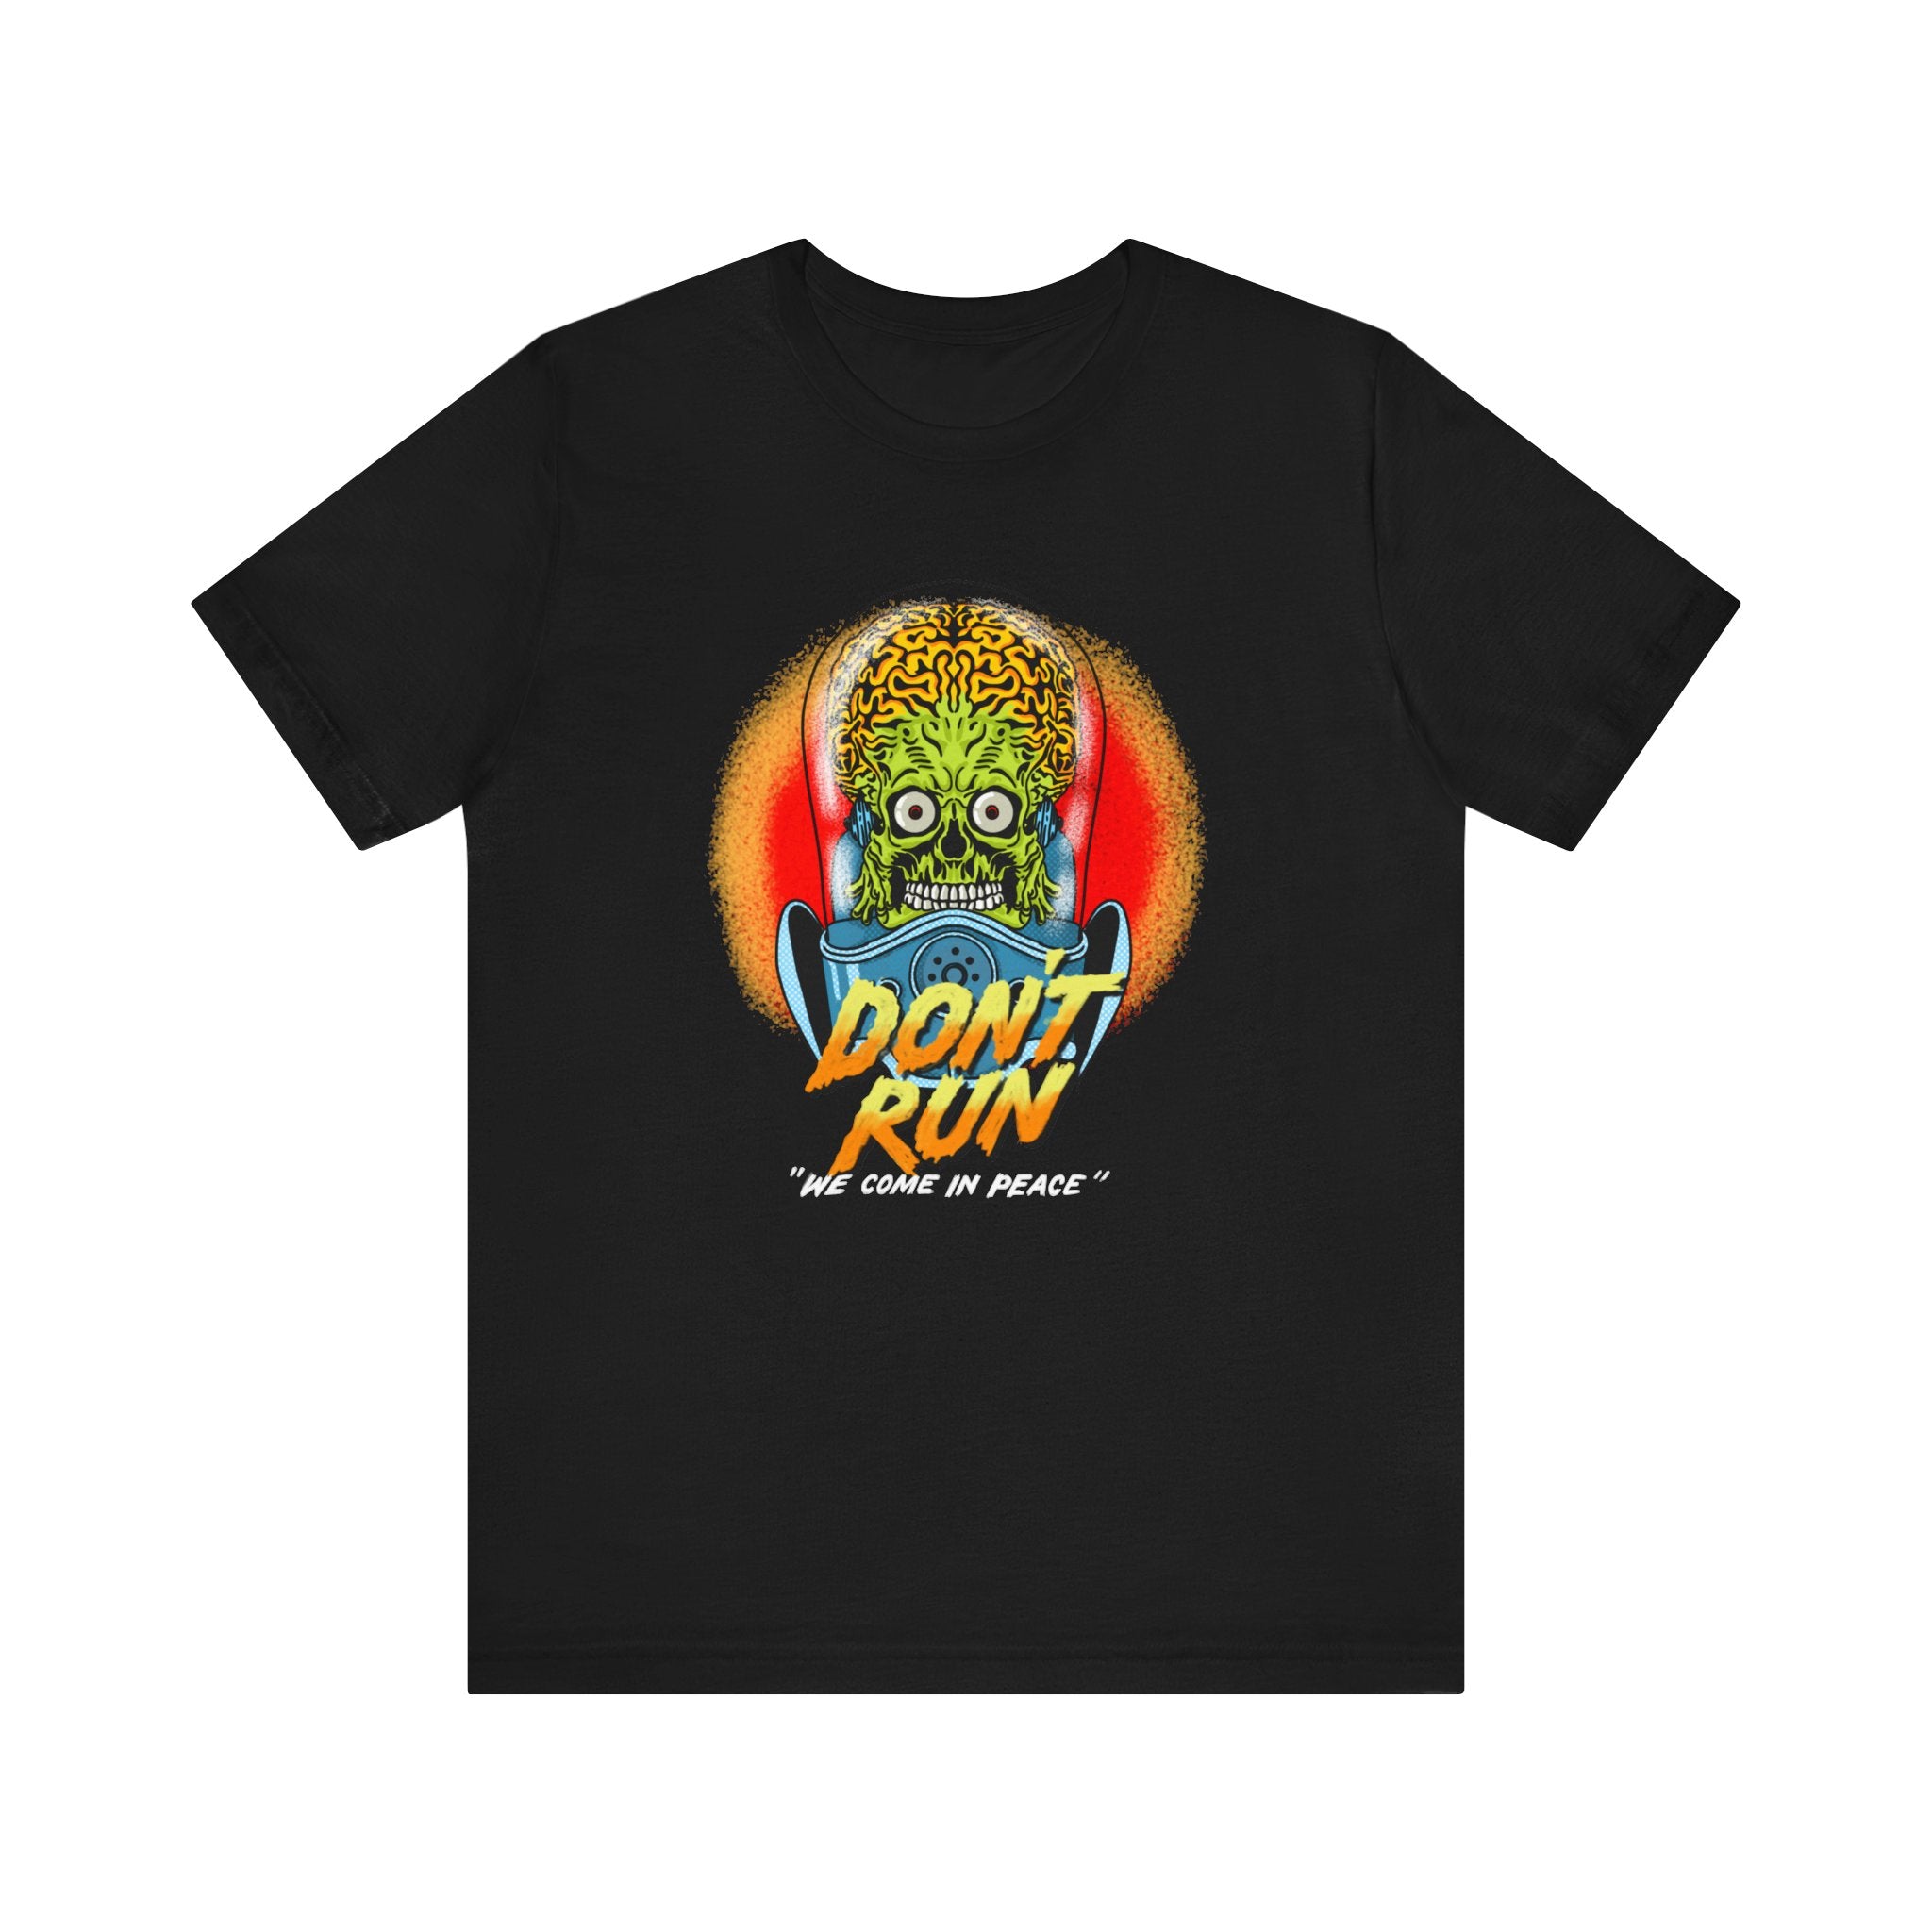 The Don't Run T-Shirt features a graphic of a skull with alien features and a brain, with the text "don't run 'we come in peace'" underneath. This unisex jersey tee is made from soft cotton.